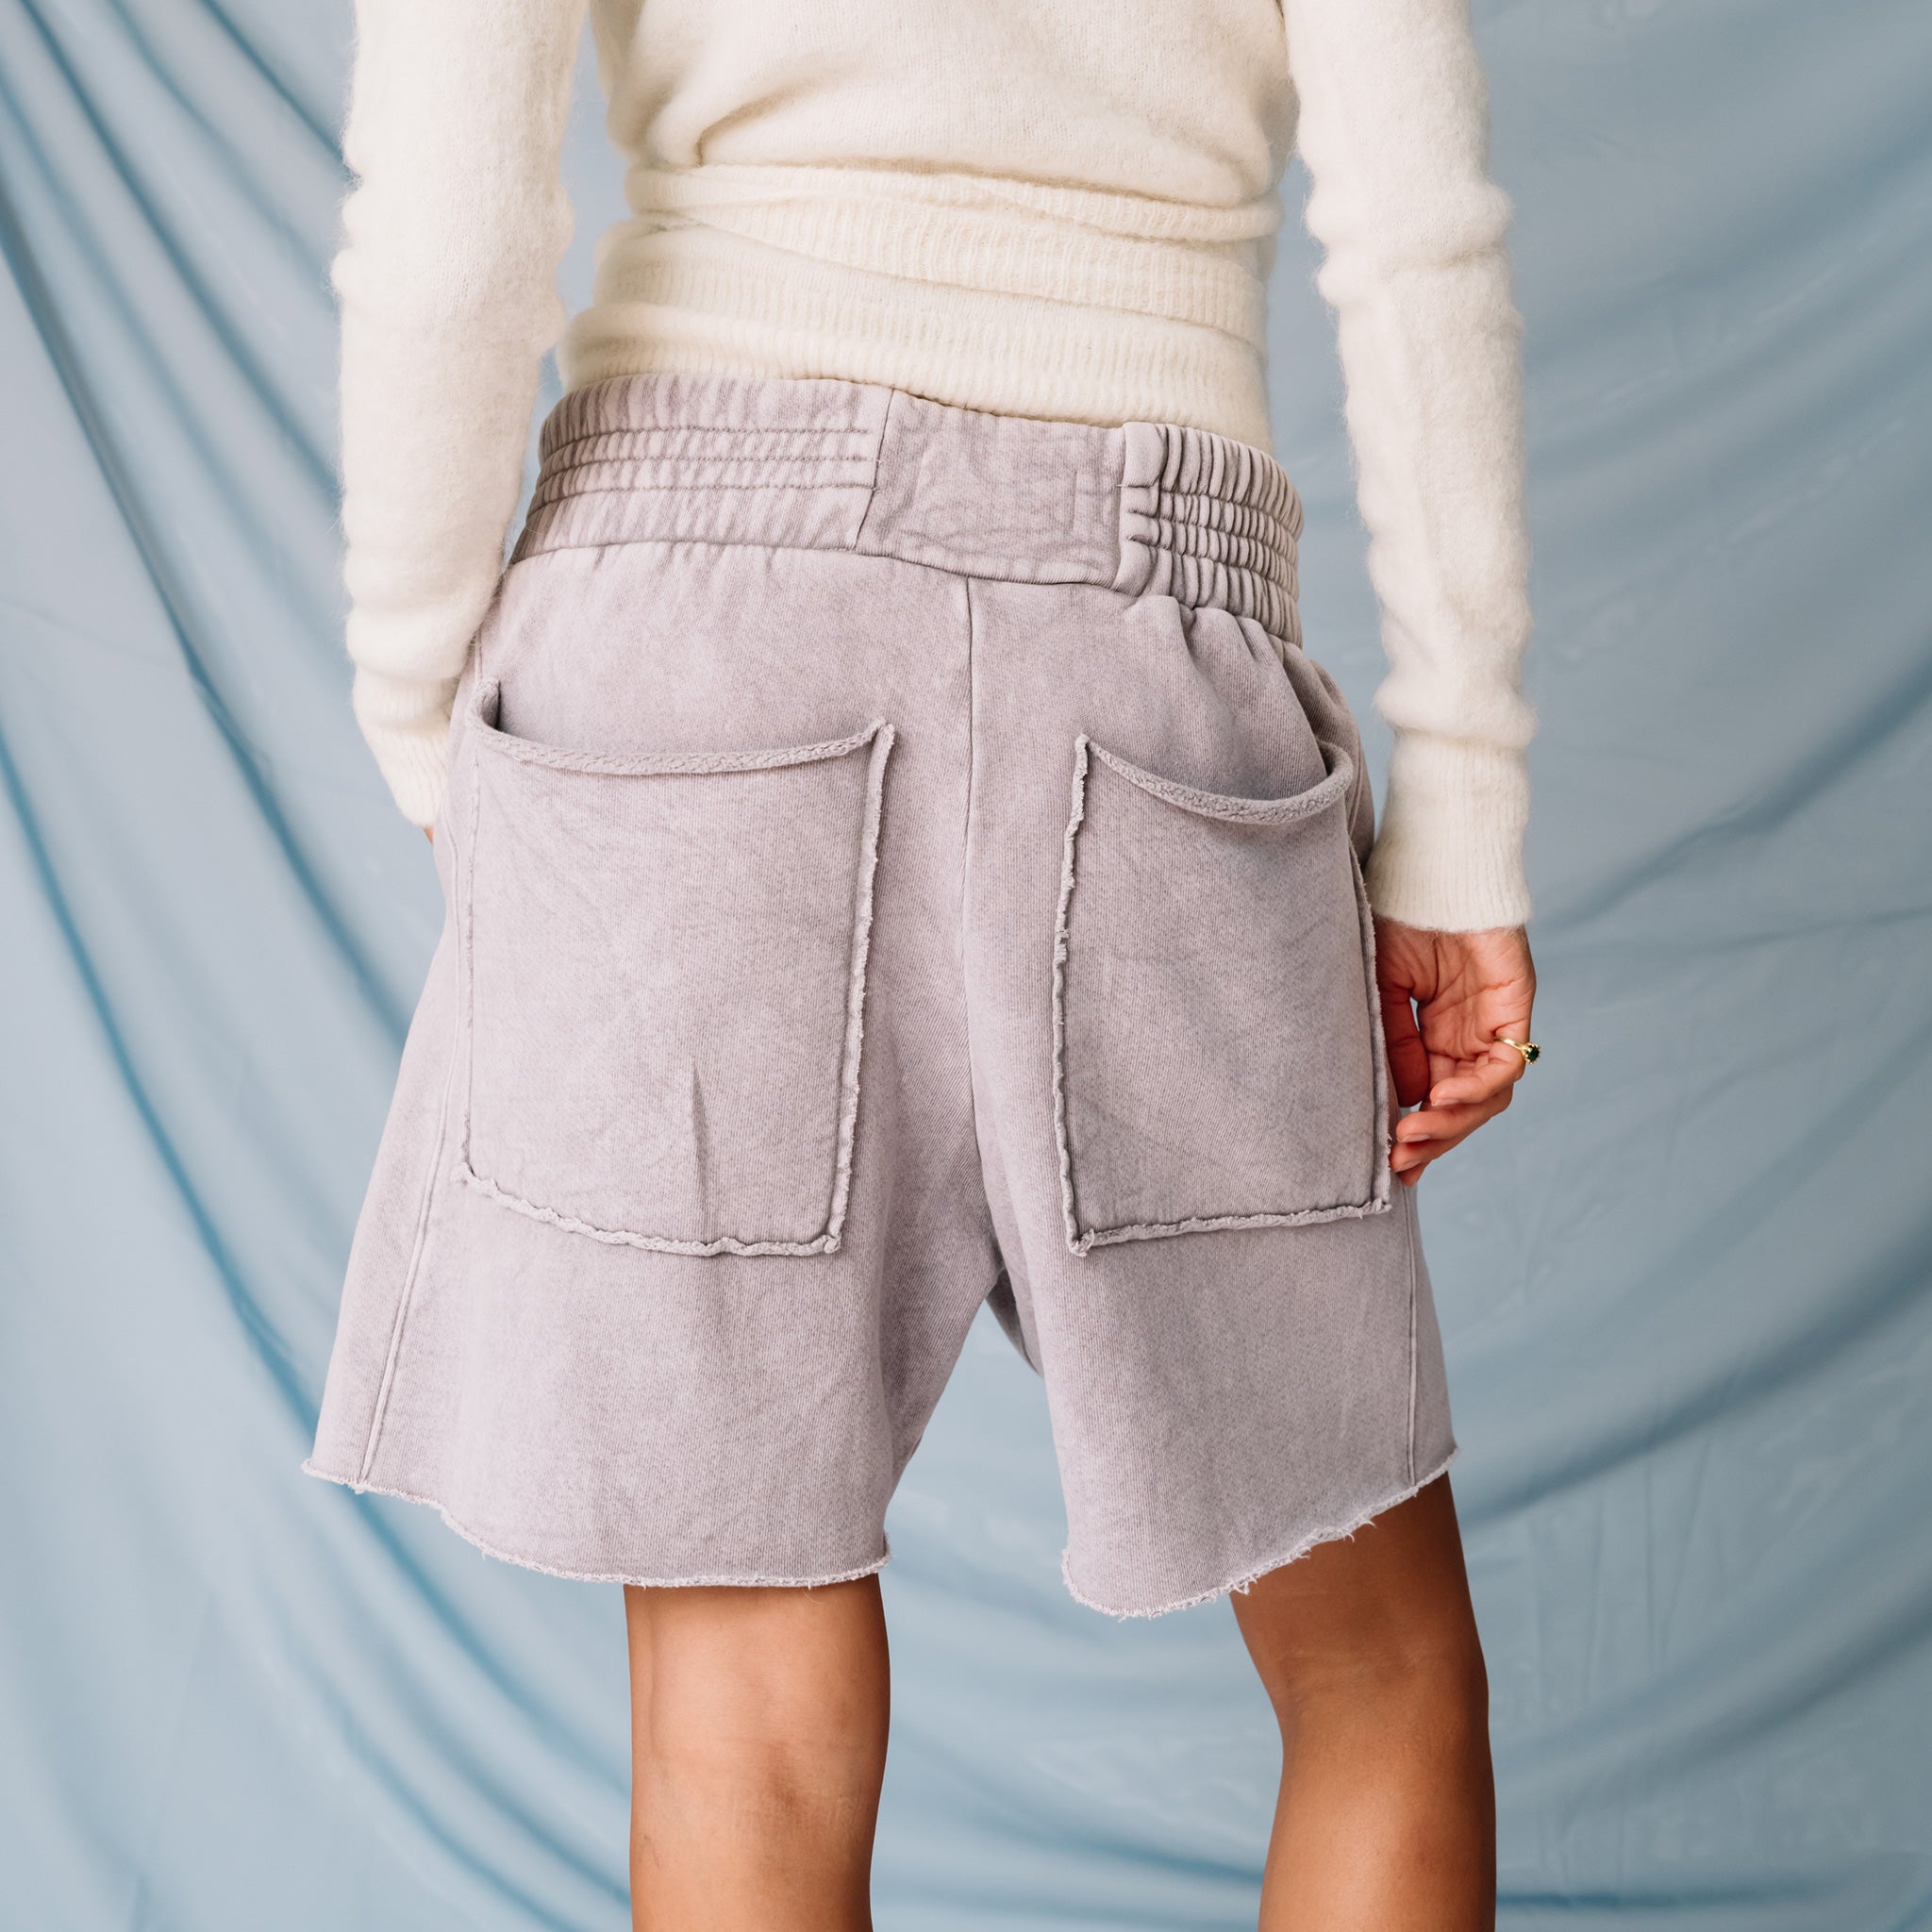 A model wears a white fuzzy sweater and the pale lavender stone Yacht Shorts by Les Tien against a soft blue backdrop - back view.